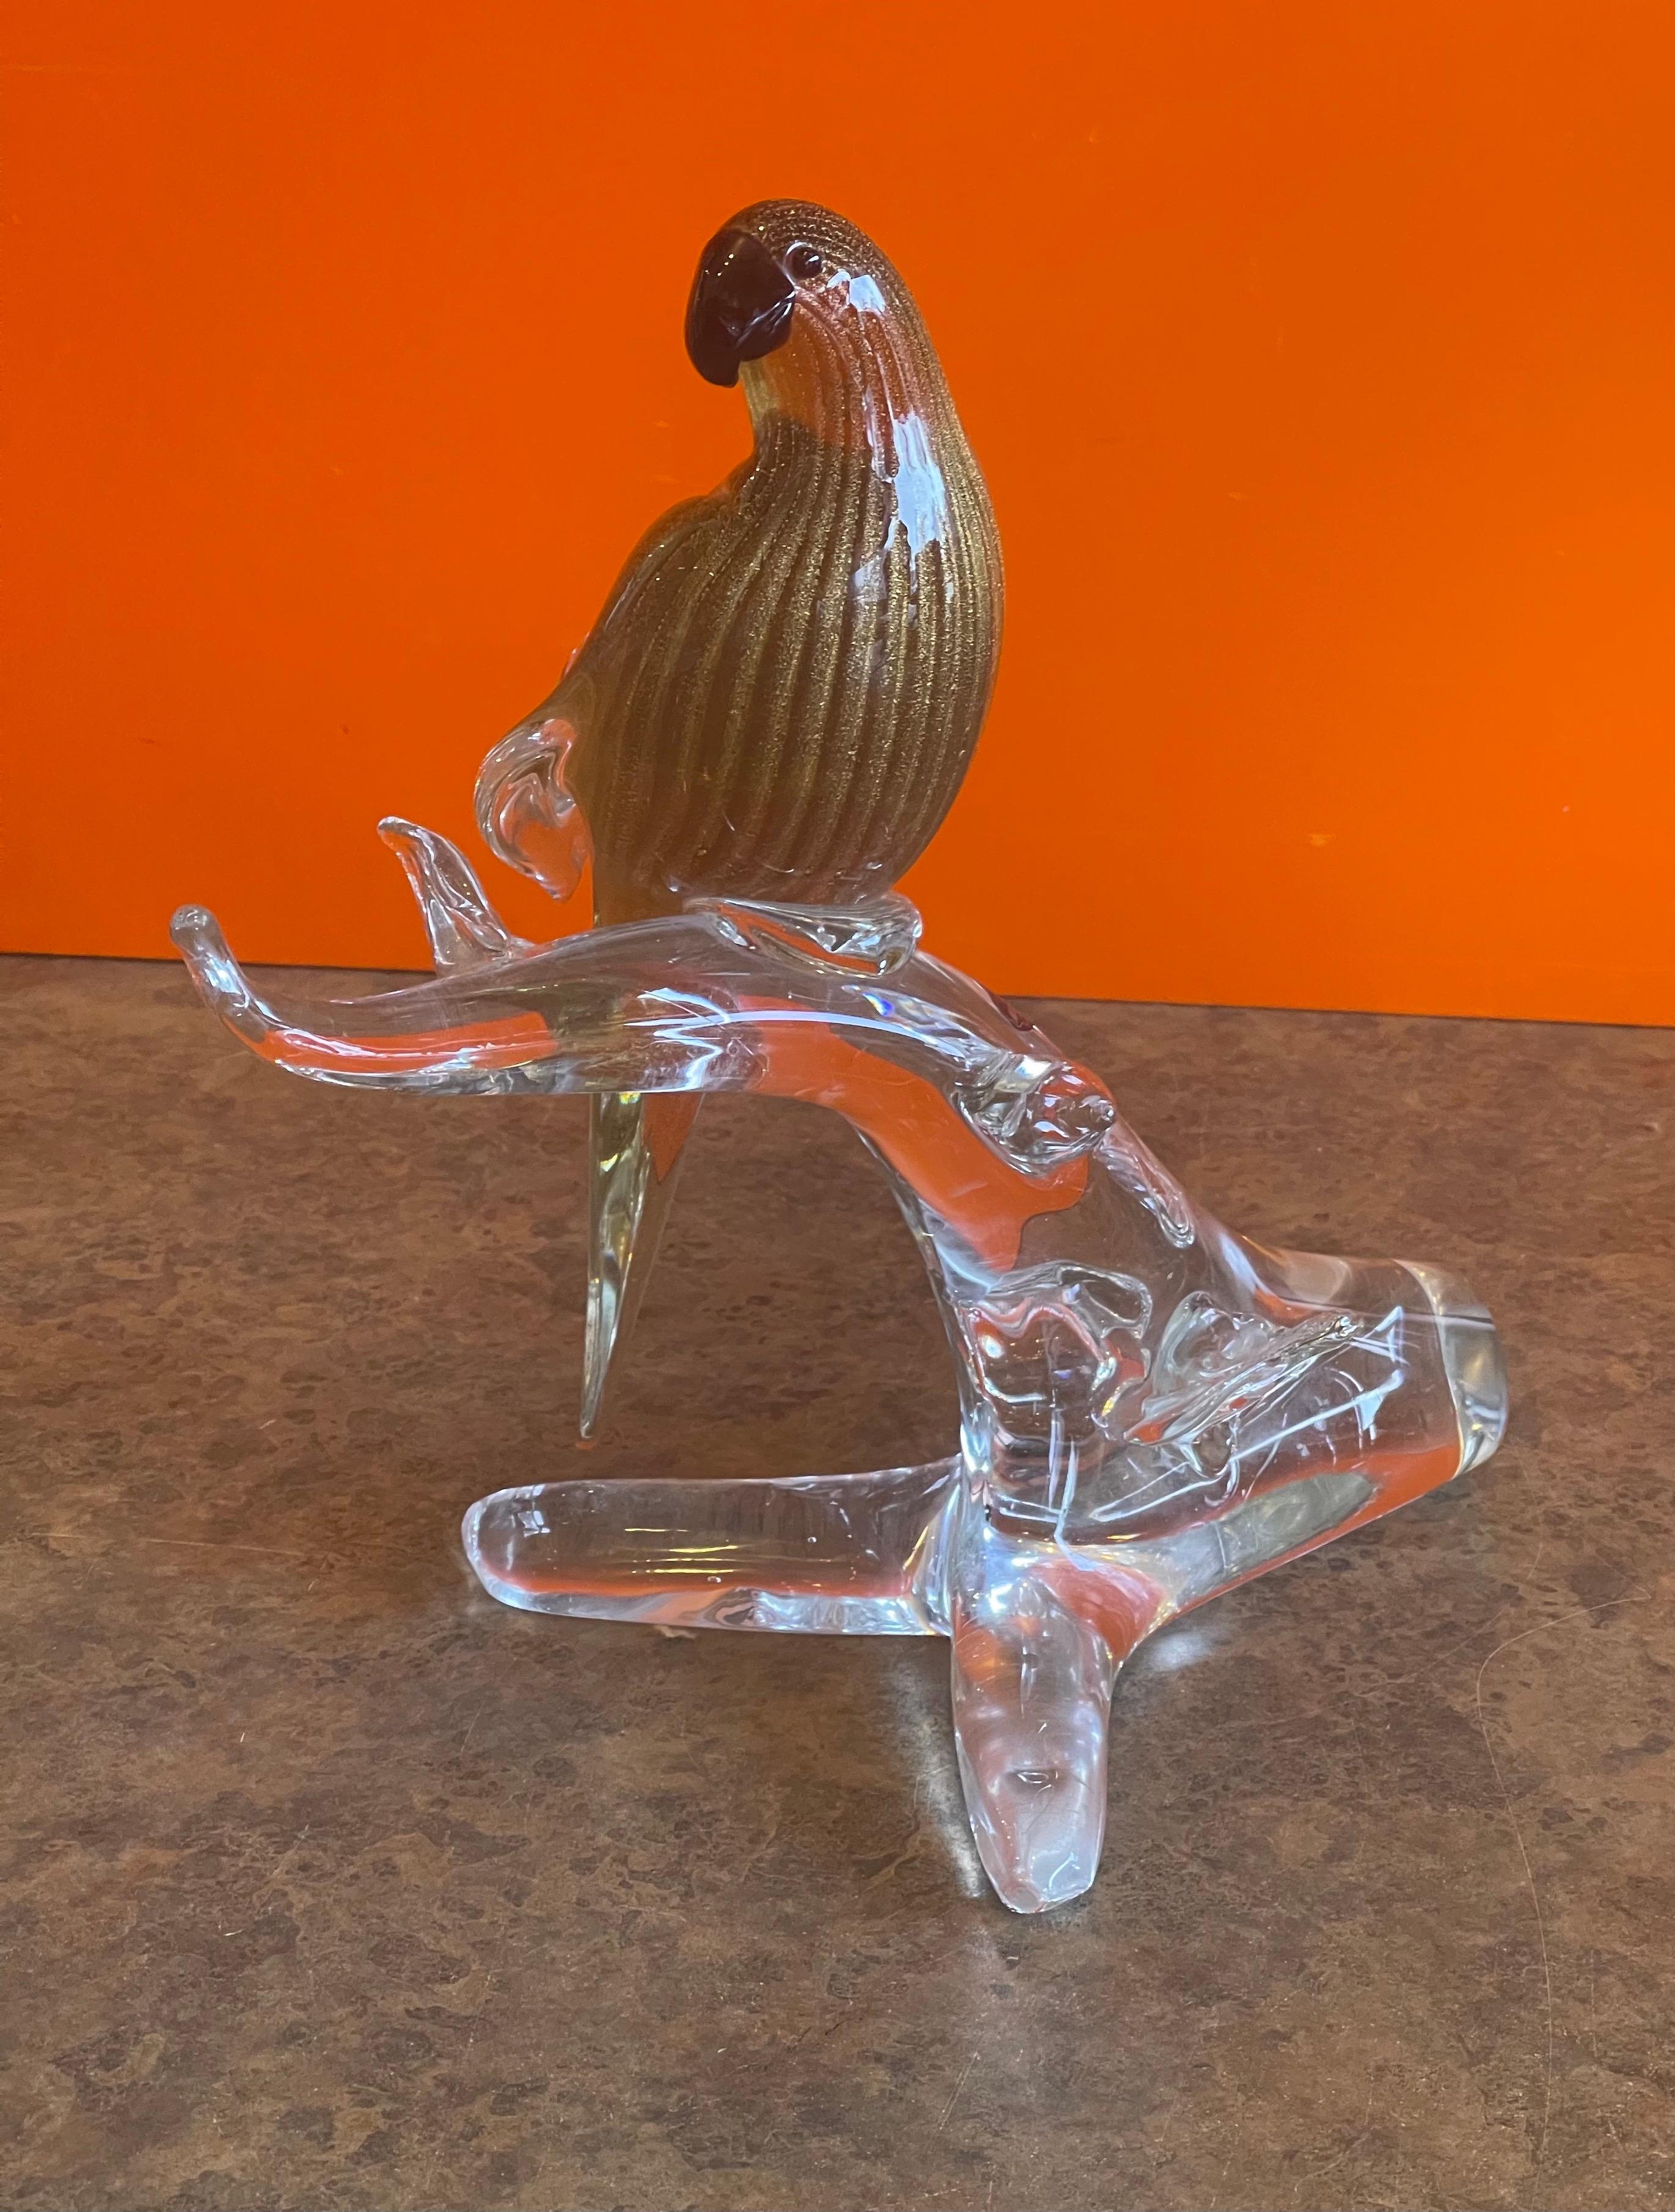 Stylish bird /parrot on branch art glass sculpture by Murano Glass, circa 1970s. The piece has a wonderful black and gold fleck color on a clear glass extended branch. The sculpture is in very good condition with no chips or cracks (some scratches